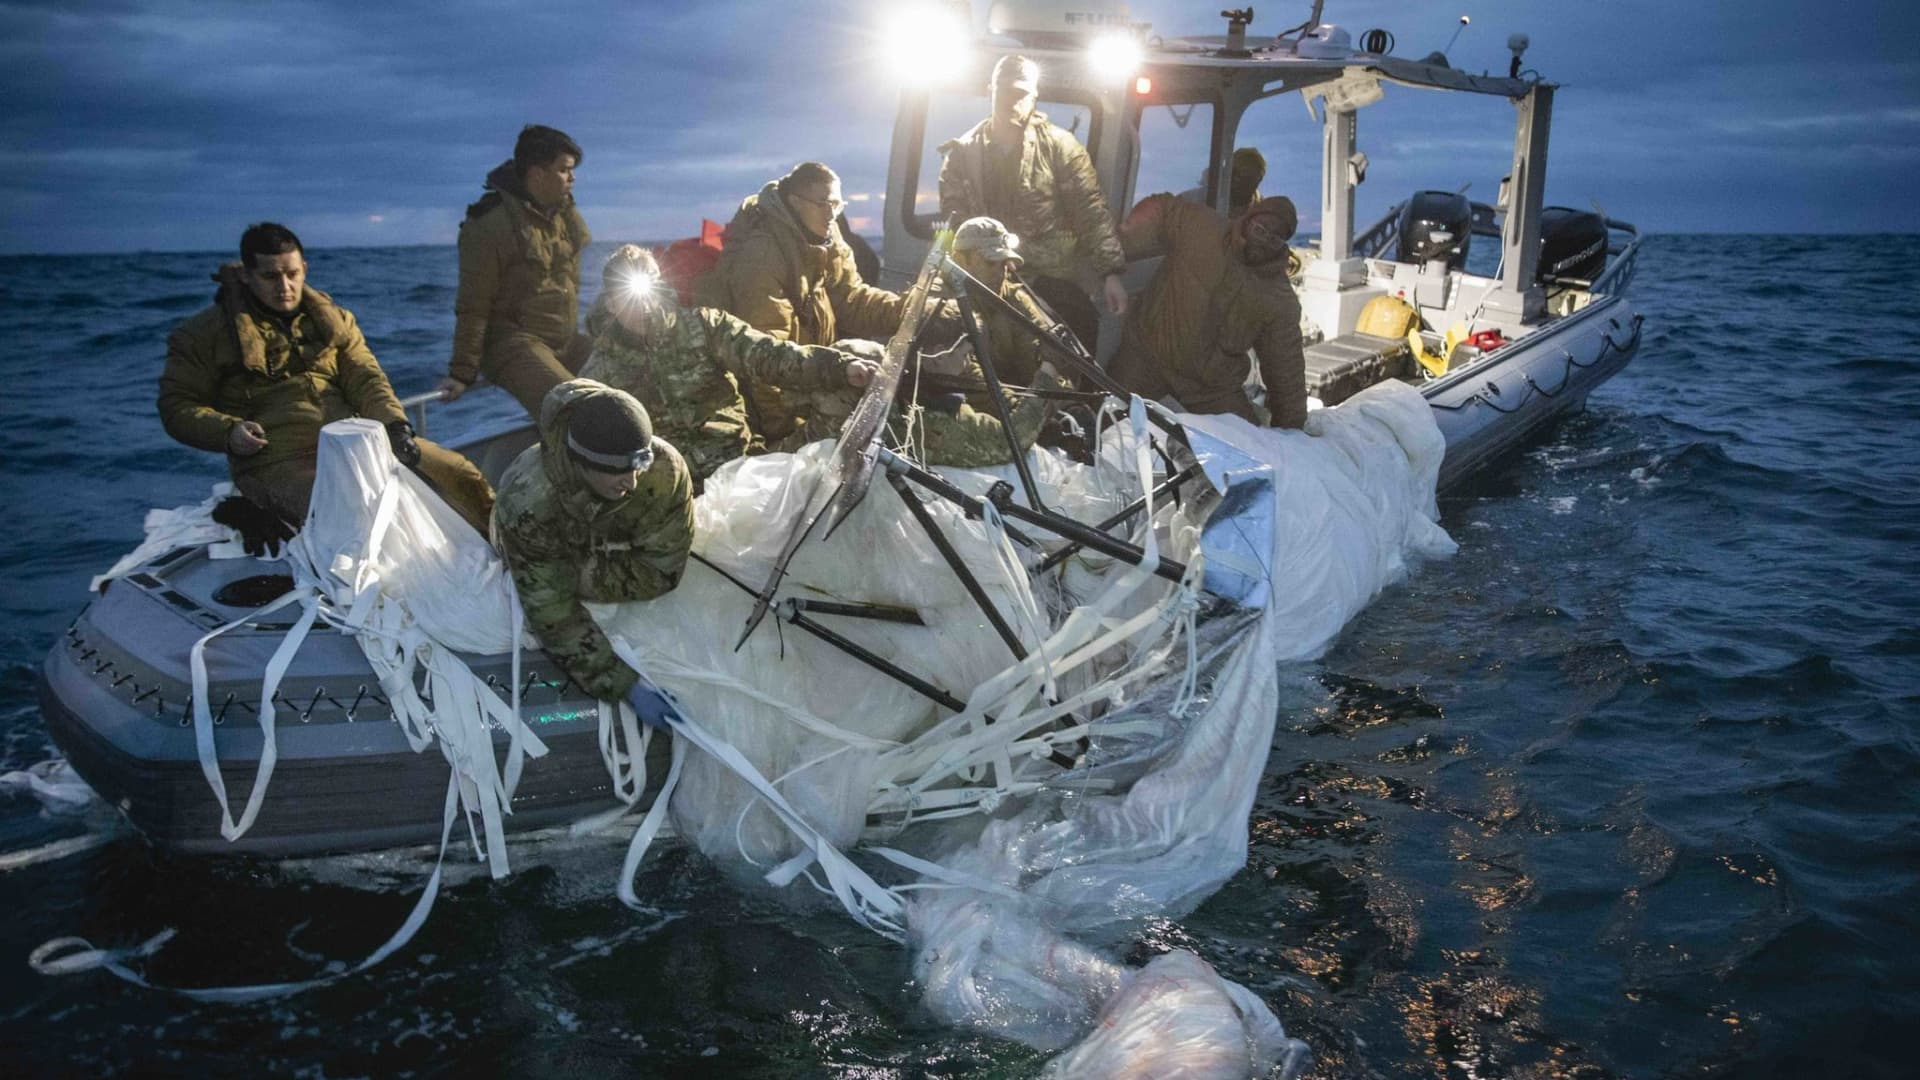 New photos show the Navy recovering downed China spy balloon off U.S. coast